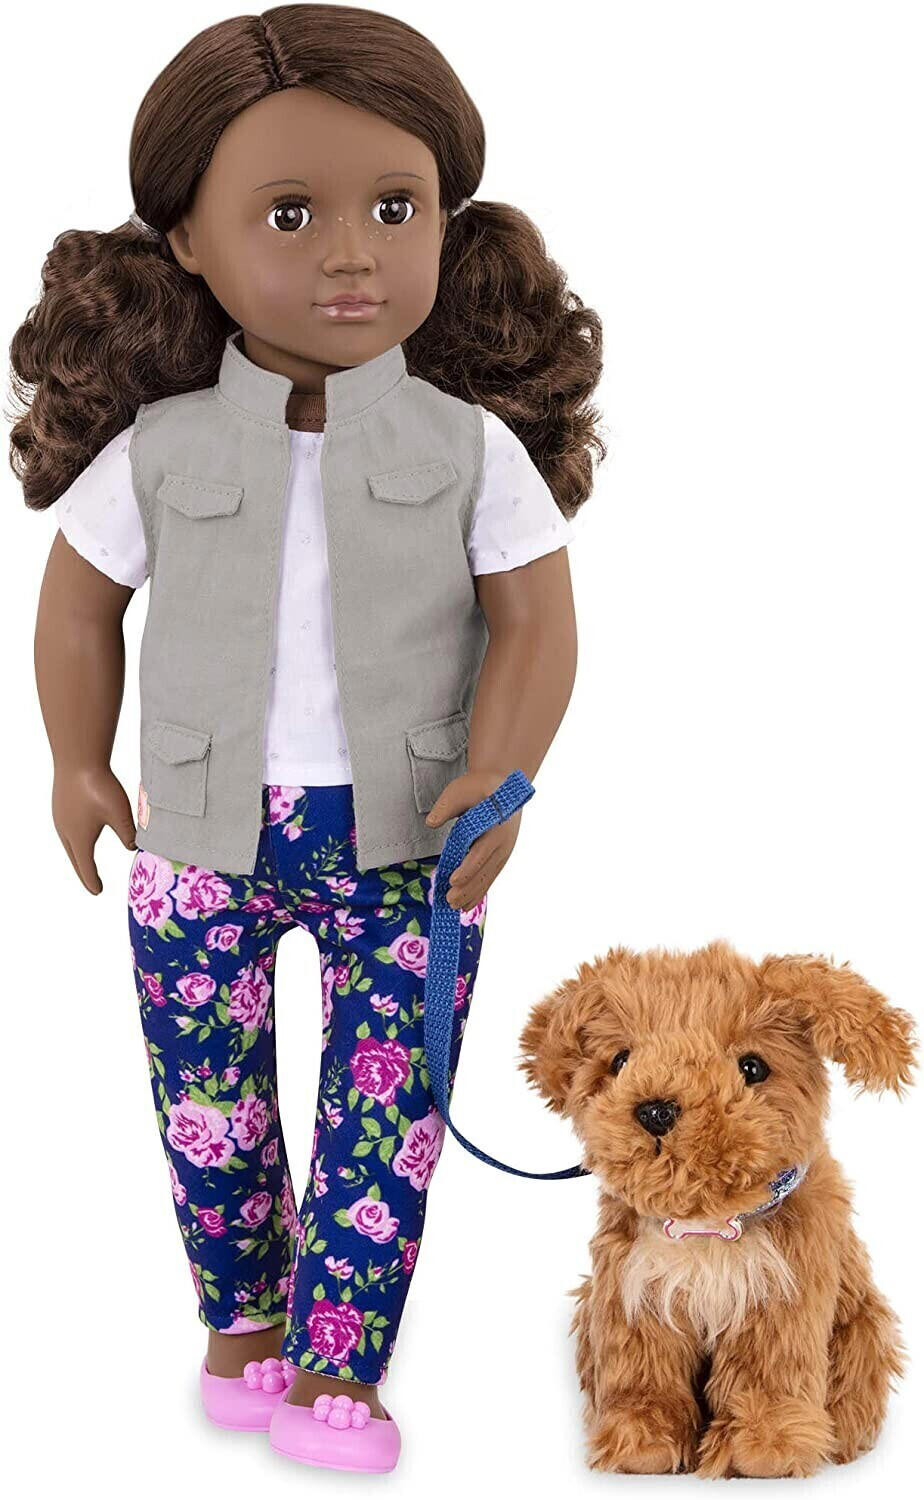 Our Generation Malia and Pet Poodle